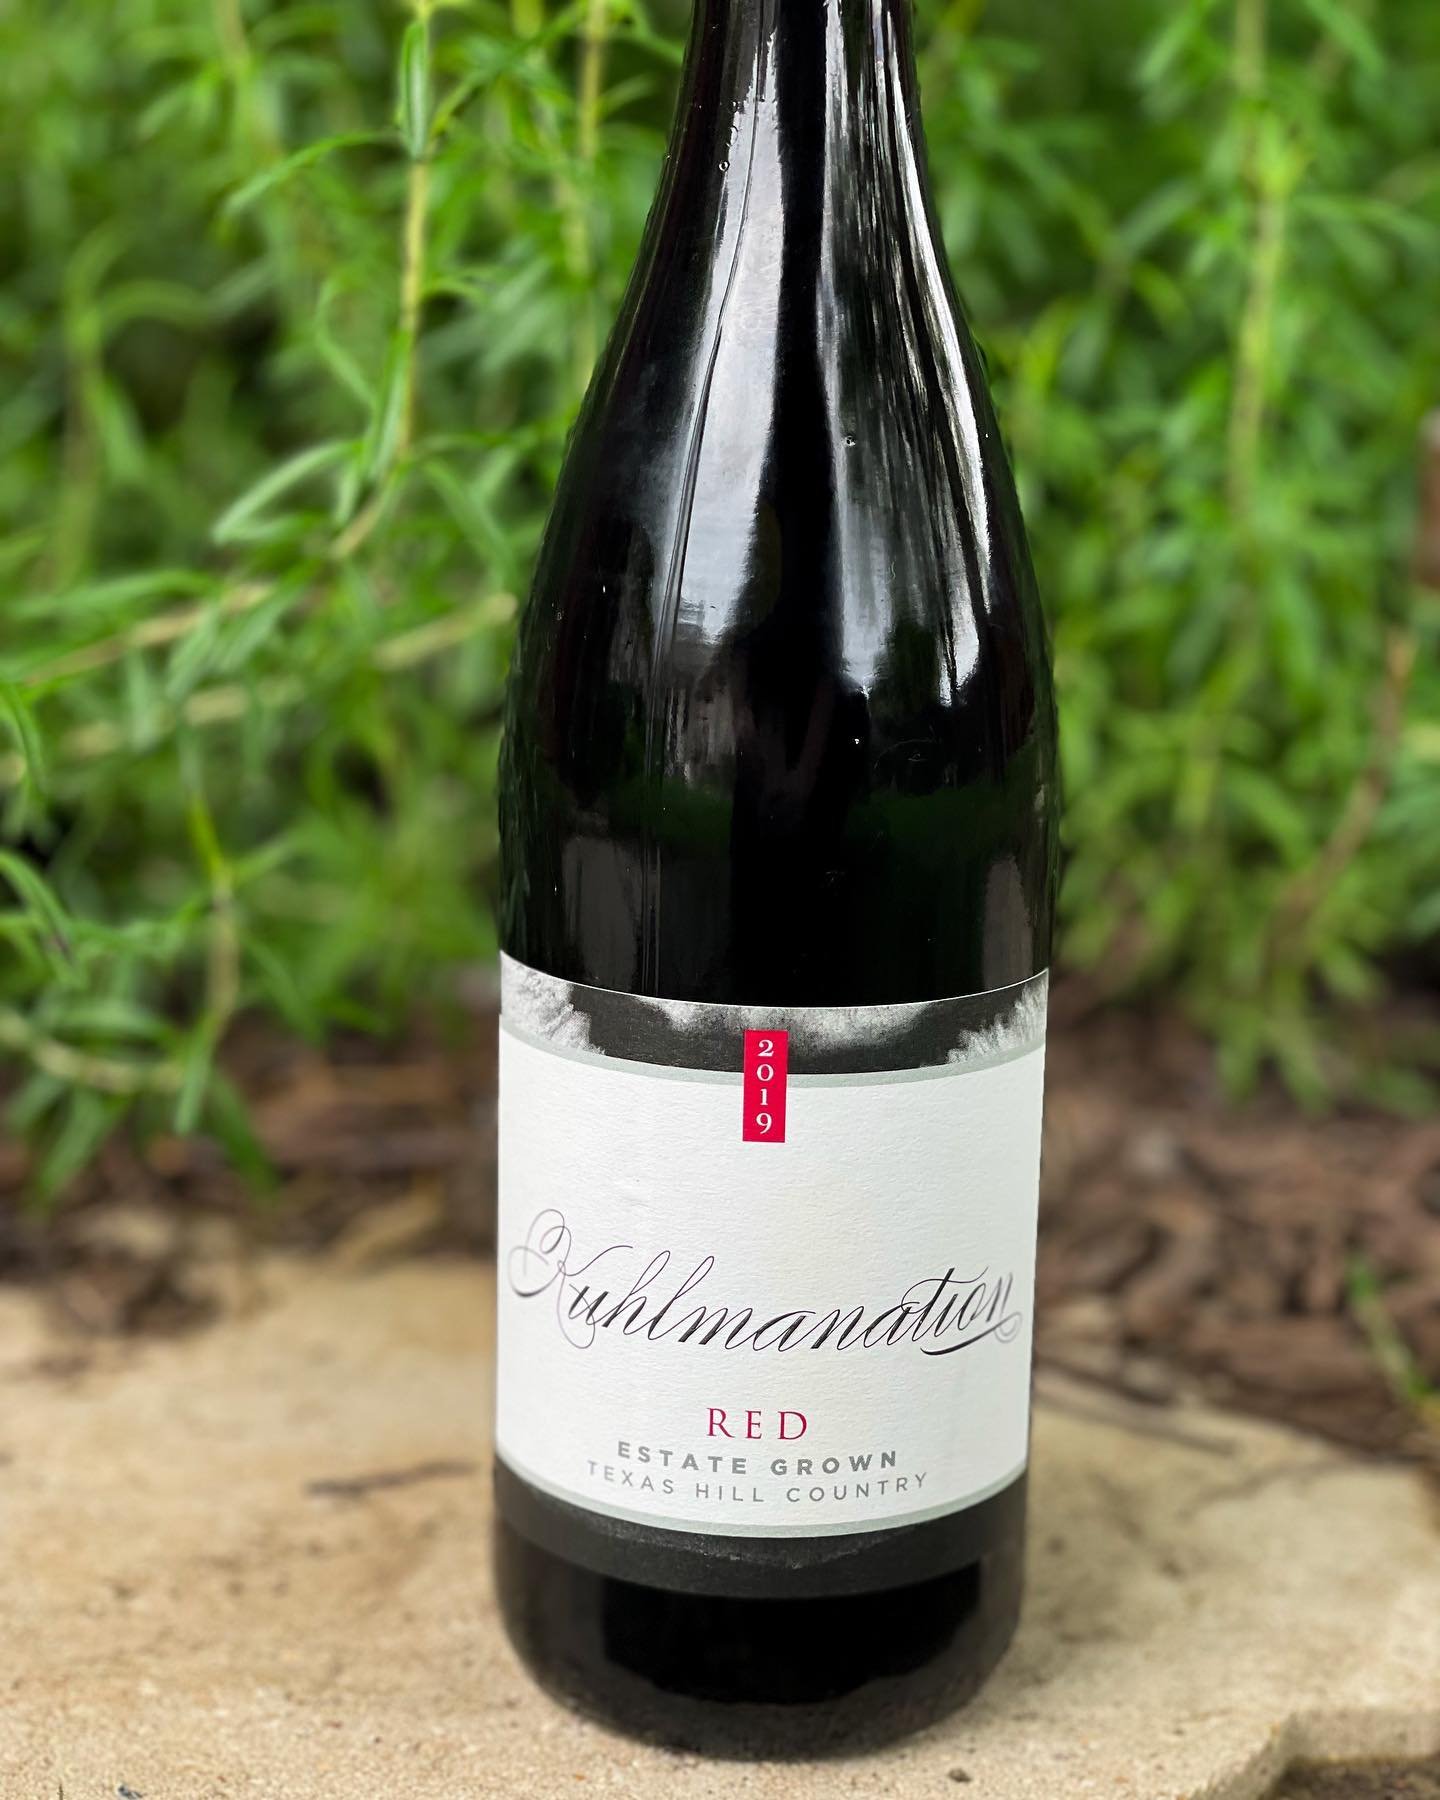 Our 2019 Estate Kuhlmanation Red is a blend of Carignan, Aglianico and Mourv&egrave;dre grown directly at our Estate.  On the palate, you&rsquo;ll enjoy notes of blackberry and blueberry fruit with firm tannins supported with good acidity. This wine 